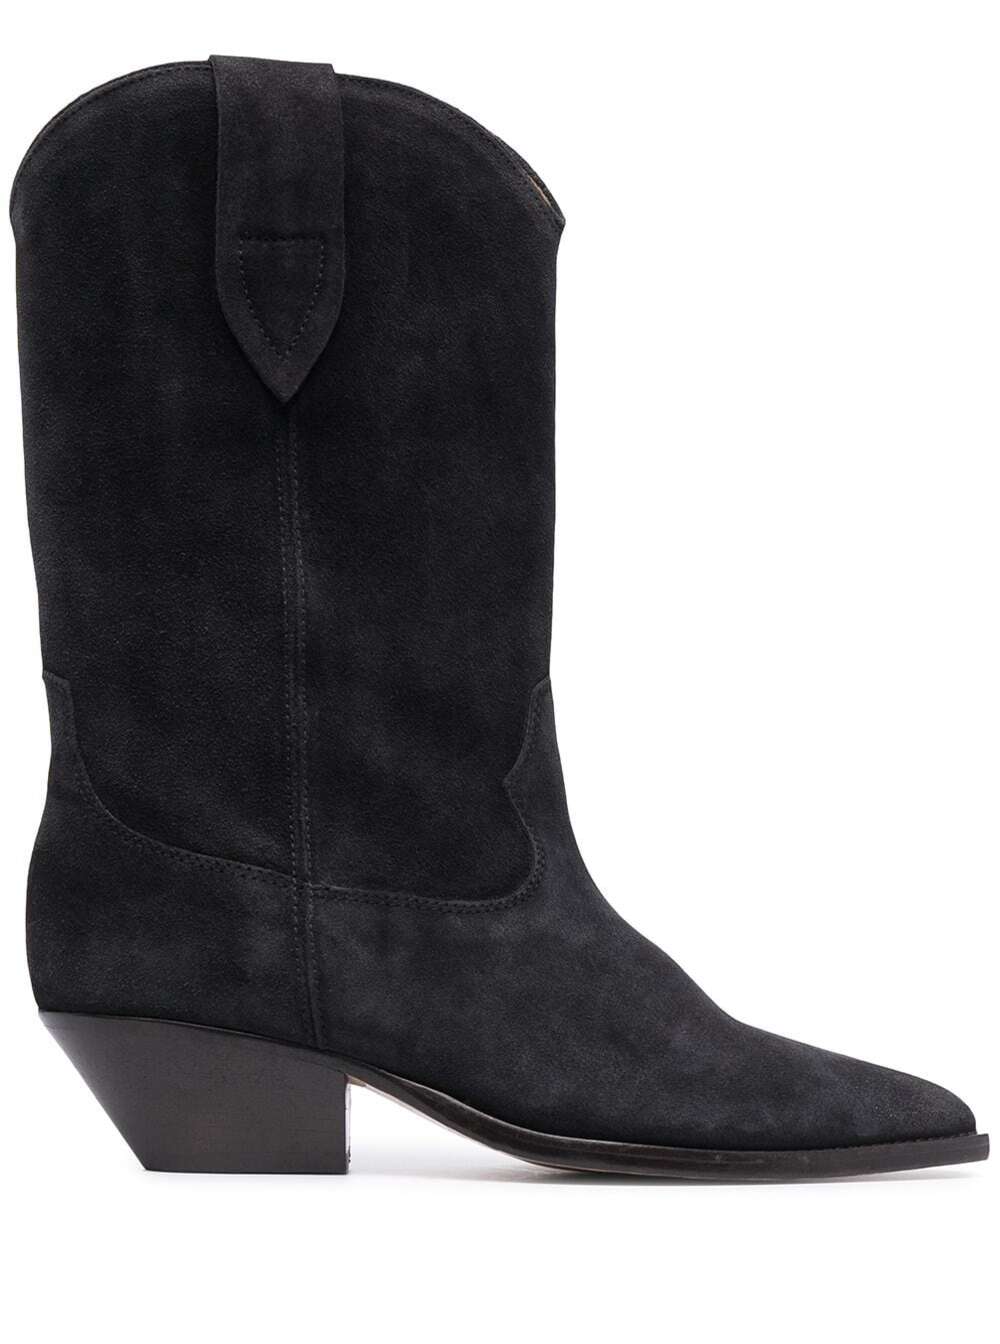 Isabel Marant Womens Black Duerto Suede Boots